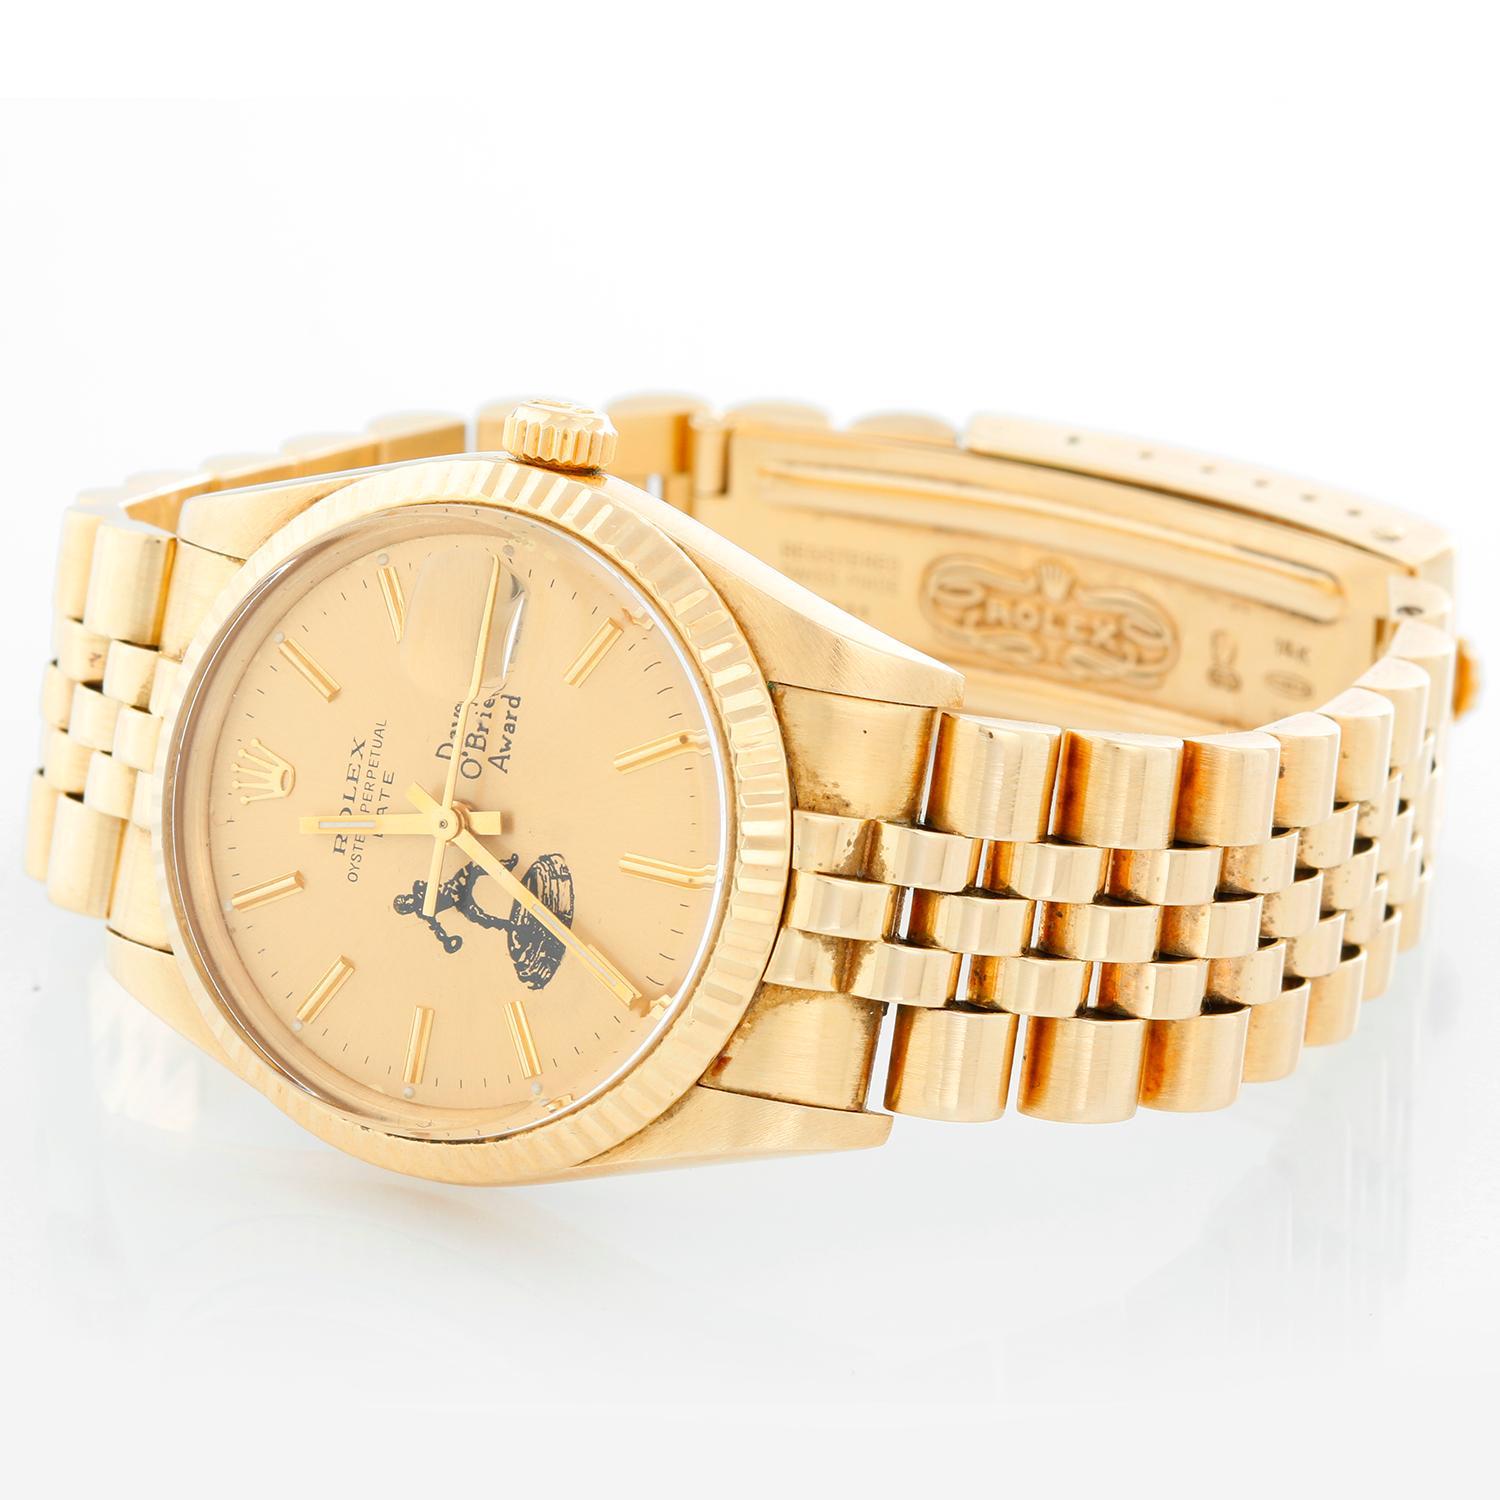 Rolex Date Men's 14K Yellow Gold Davey O'Brien Award Watch - Automatic winding, acrylic crystal. 14k yellow gold case with fluted bezel ( 34 mm diameter) . Case back inscribed to Charles Ringler - Man of Vision 